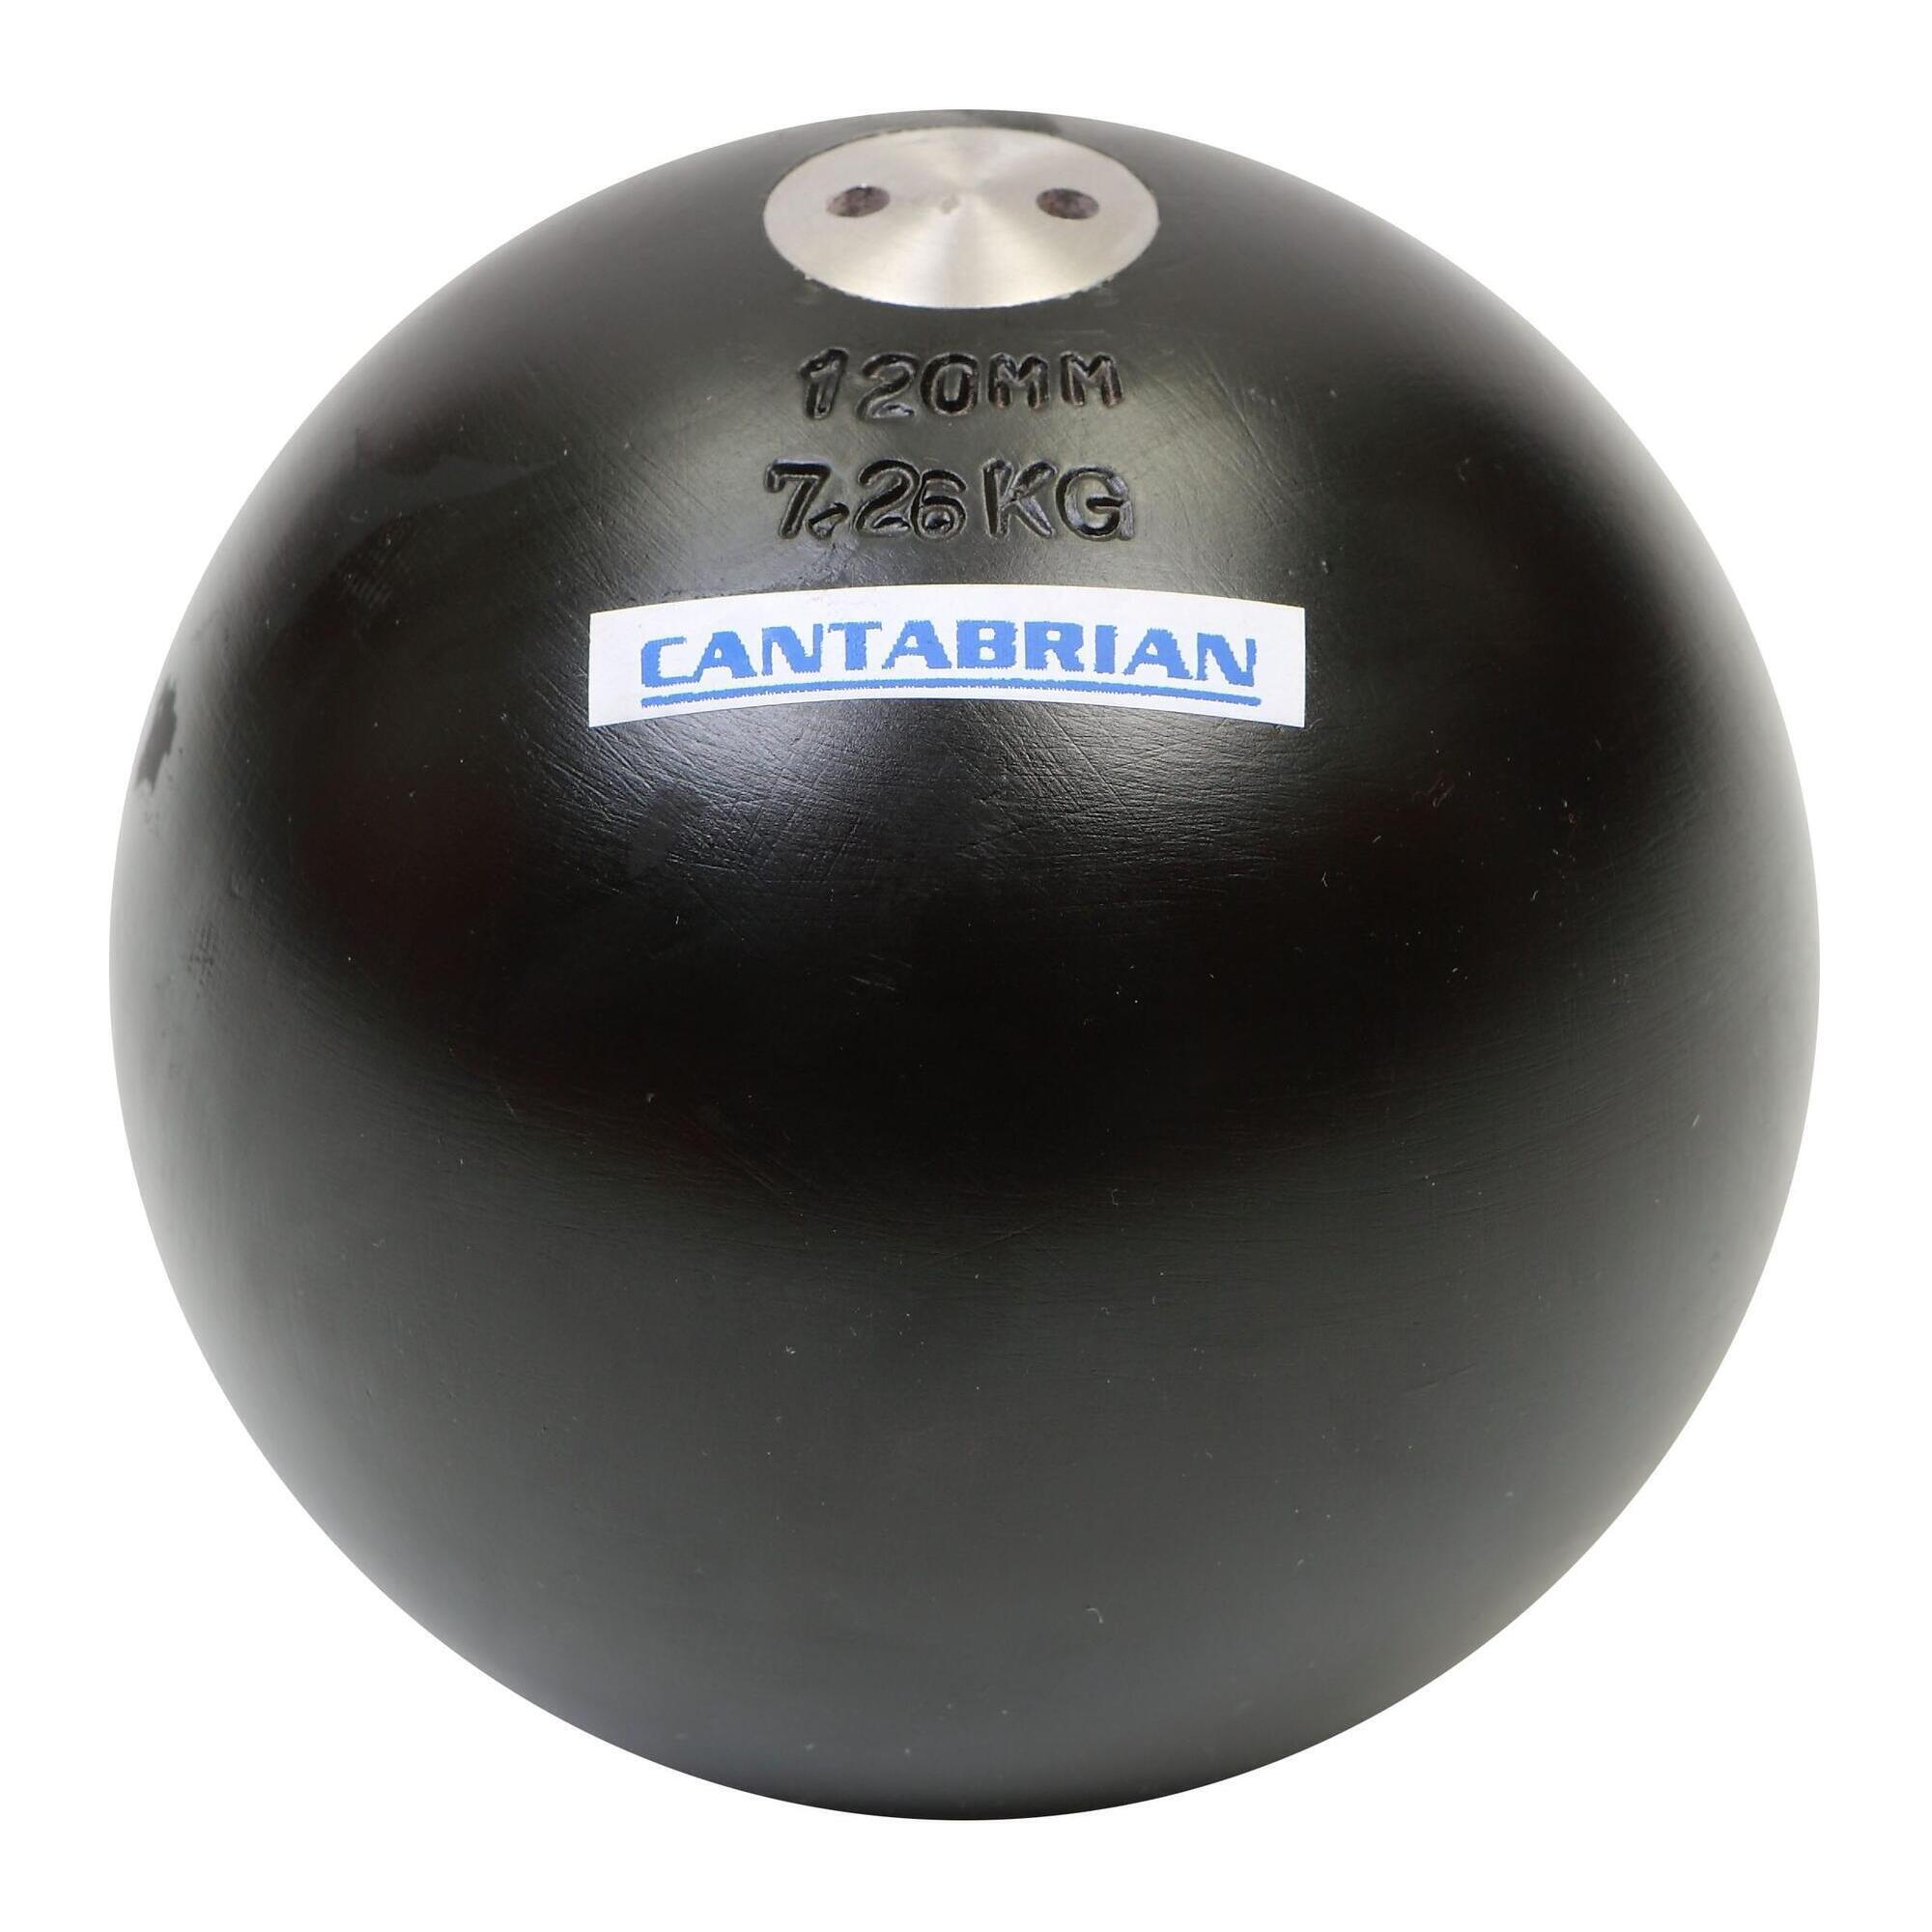 CANTABRIAN Cantabrian Olympic Steel Shot Puts - 97mm dia